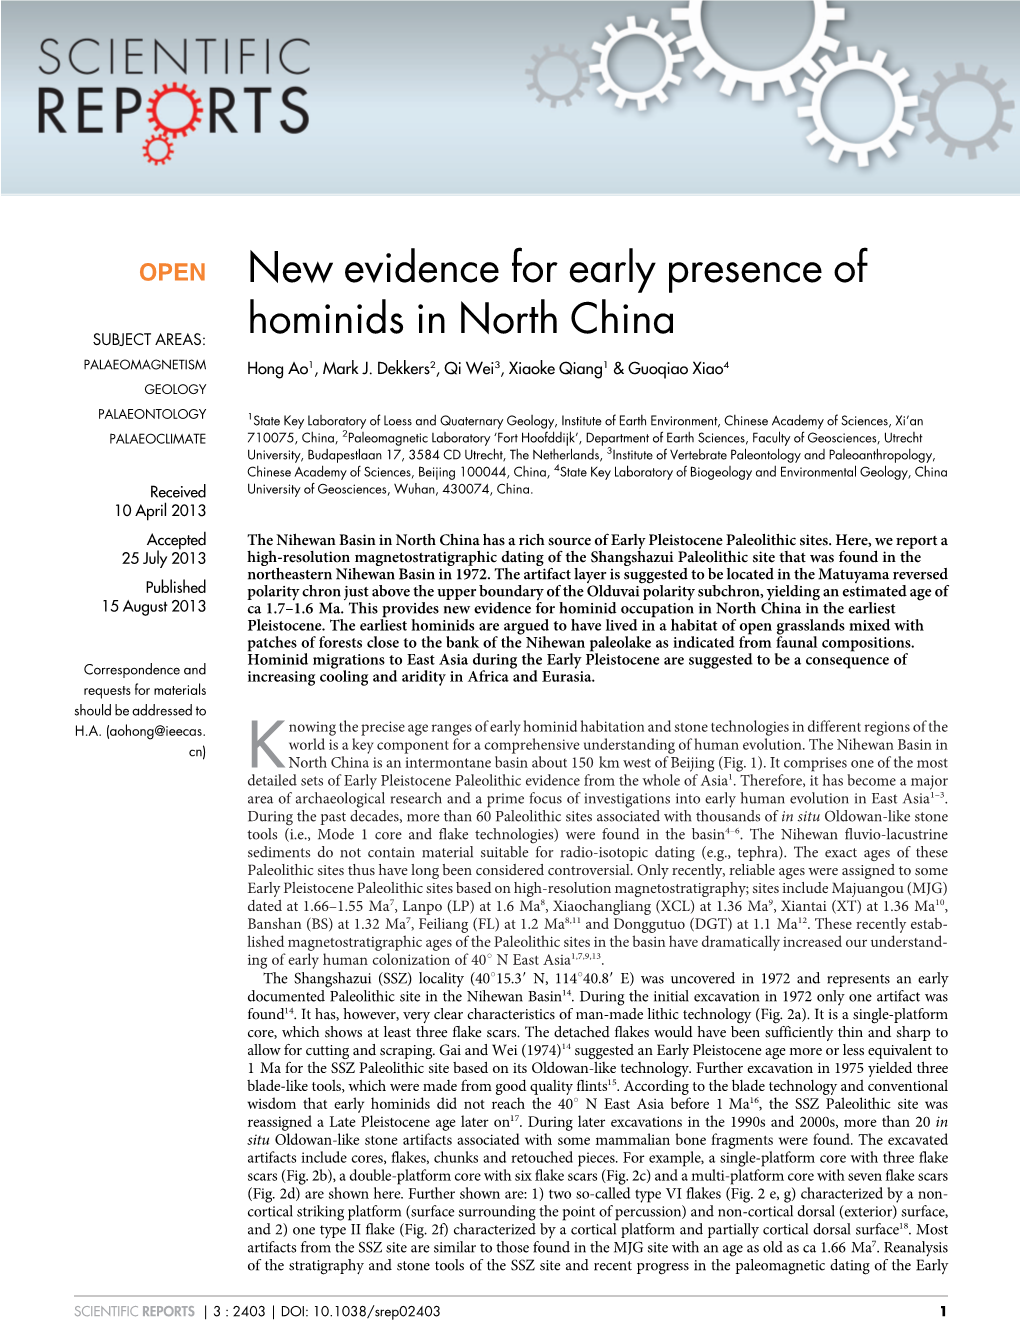 New Evidence for Early Presence of Hominids in North China